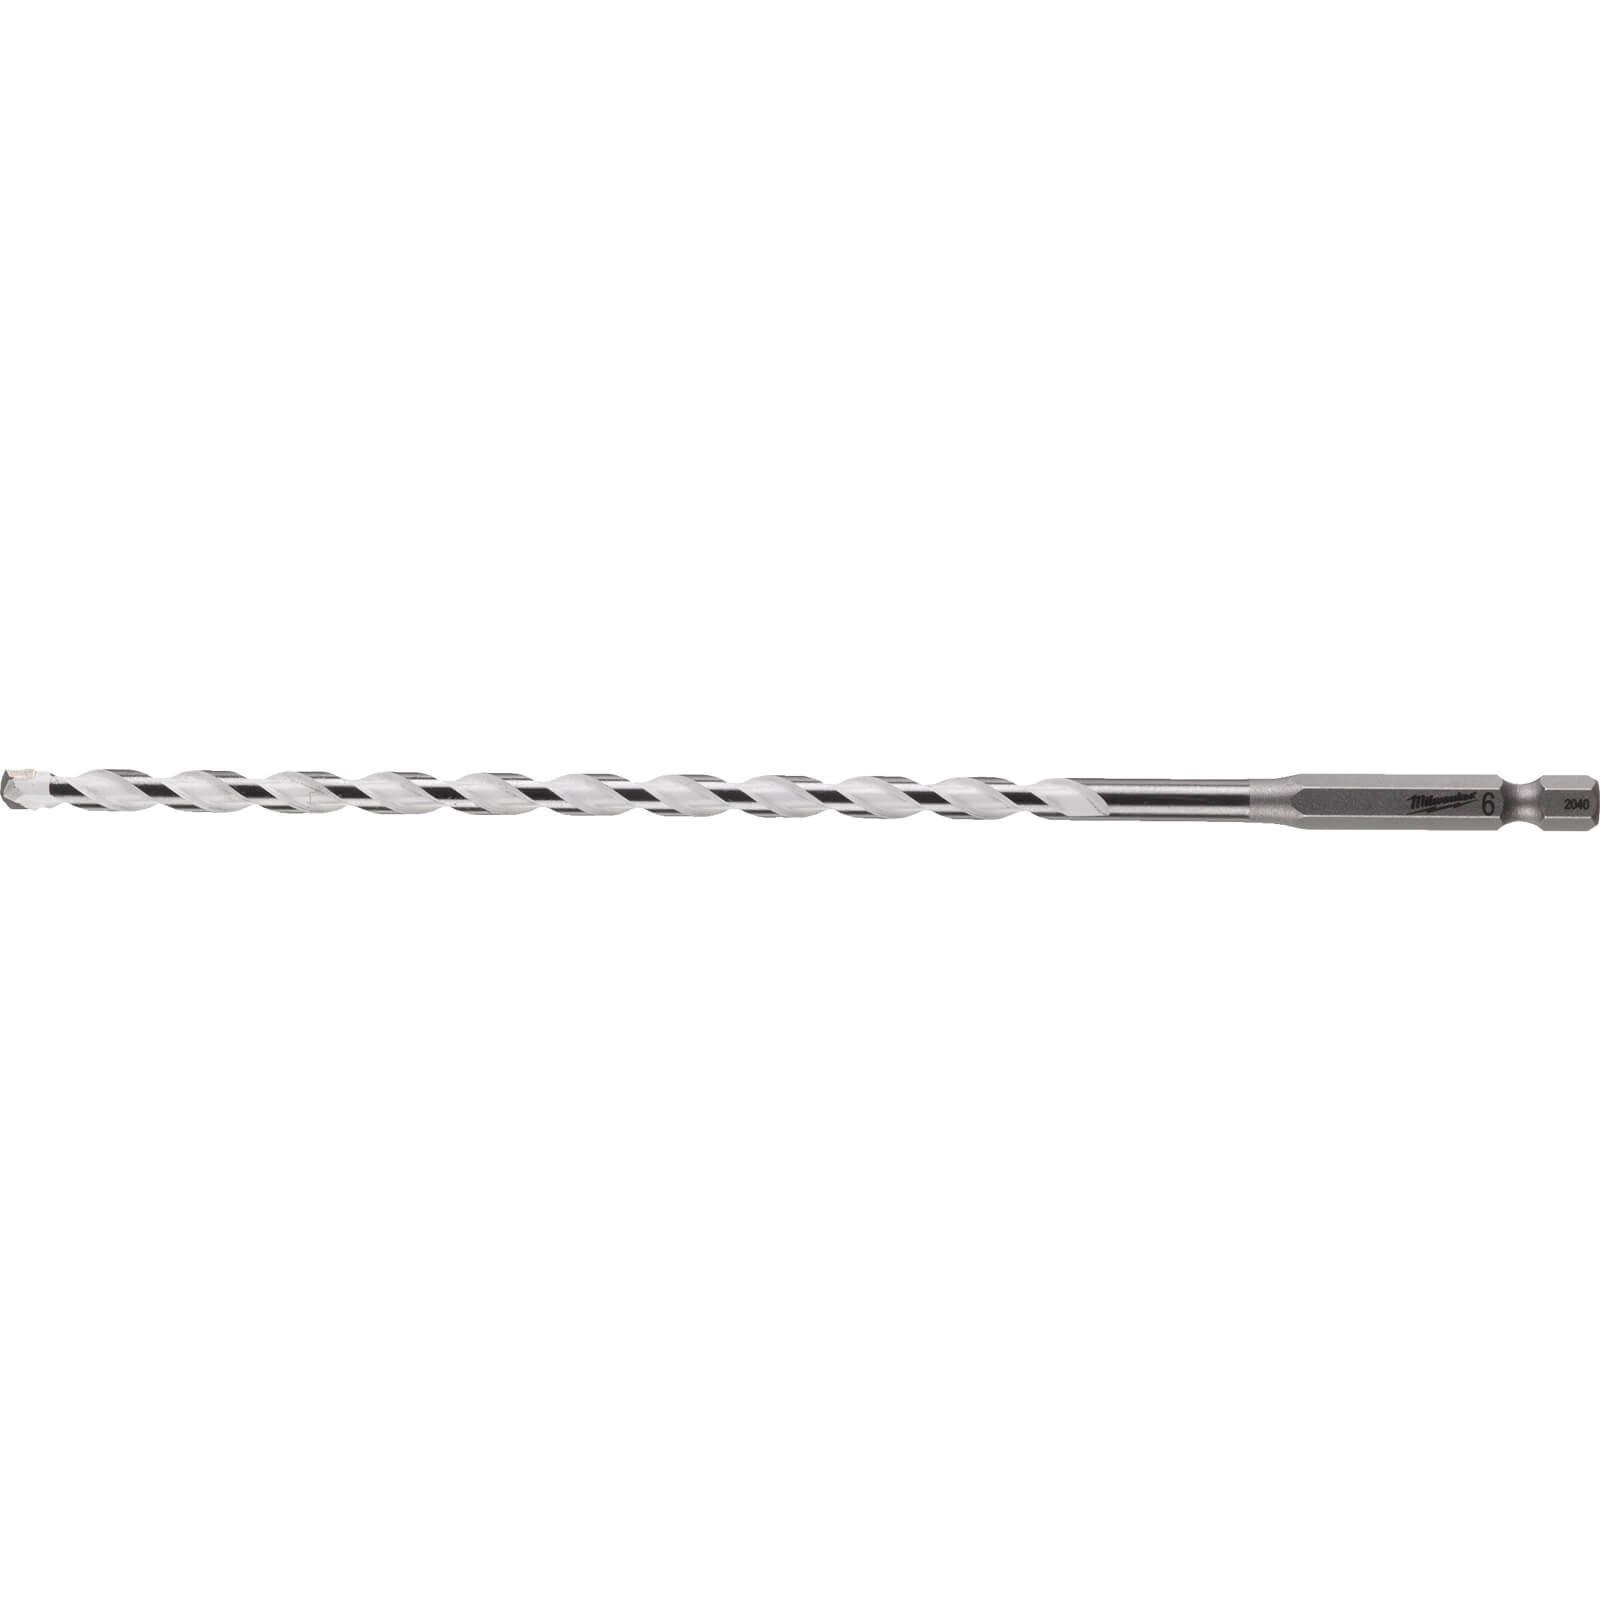 Photos - Drill Bit Milwaukee Multi Material Drill 6mm 200mm Pack of 1 4932471098 